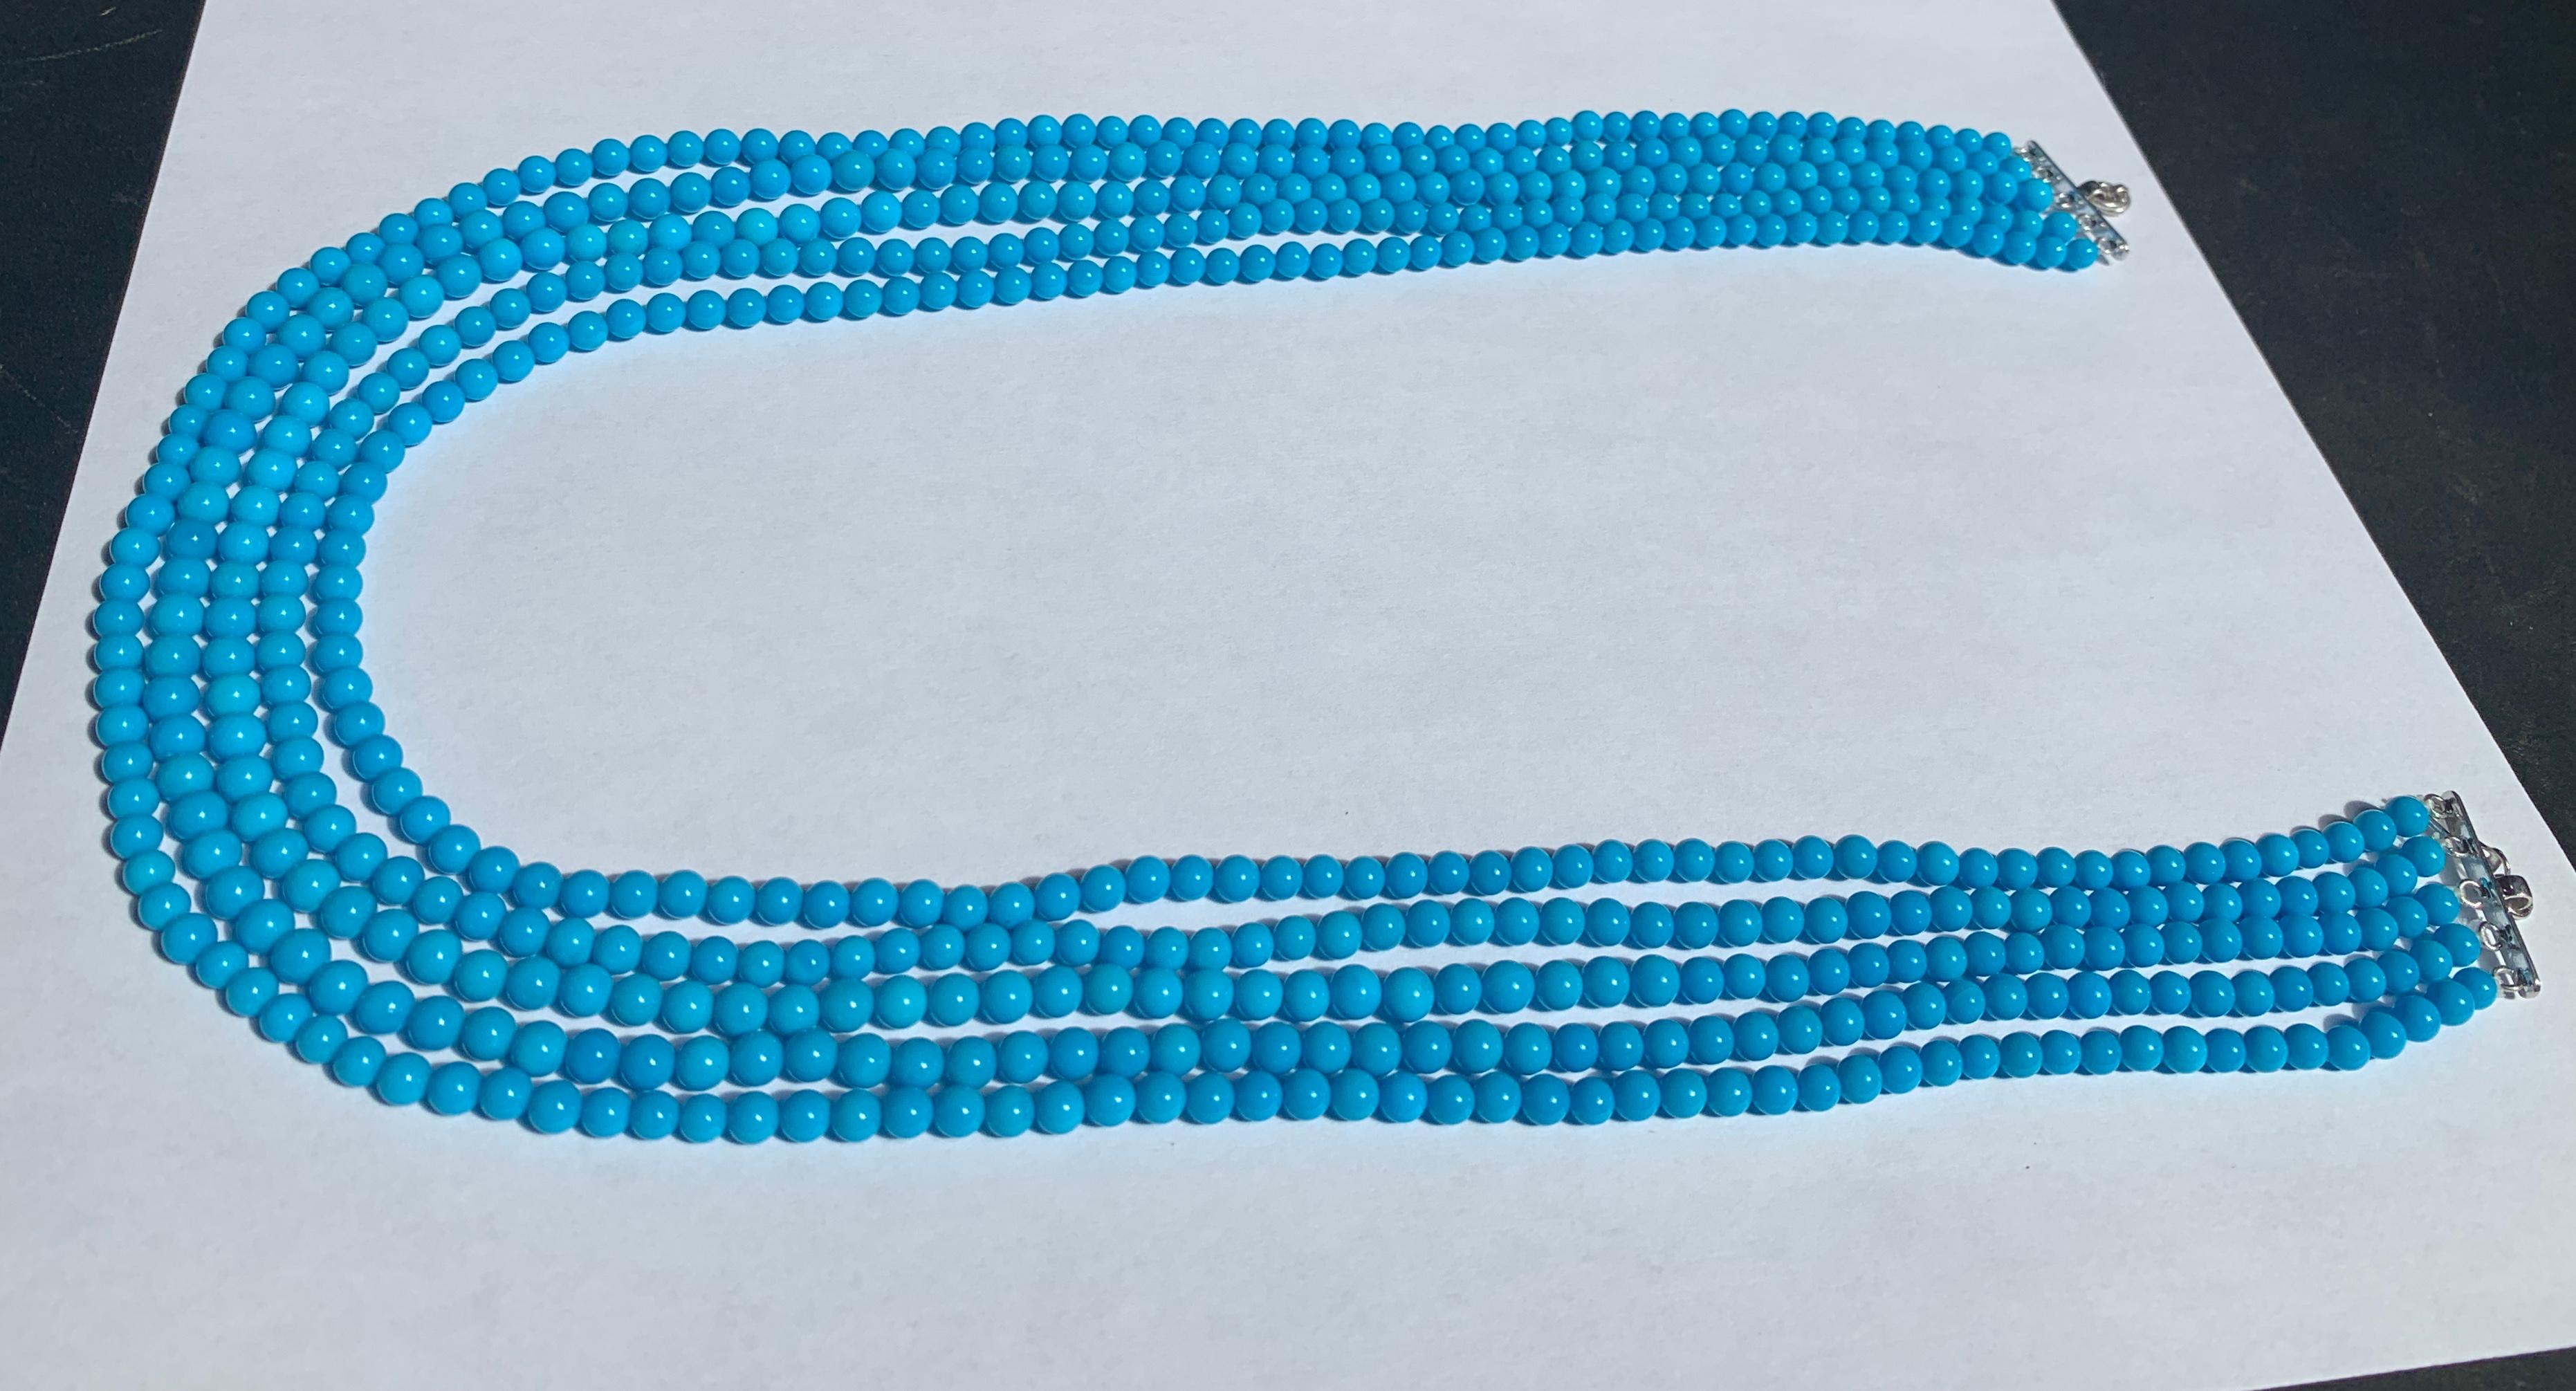 465 Carat Natural Sleeping Beauty Turquoise Necklace , Multi Strand, 18 K Gold
Natural Sleeping Beauty Turquoise which is very hard to find now.
Necklace has 5 strand
Approximately 4-5 mm each bead
18 K white gold clasp
Please look at the all the